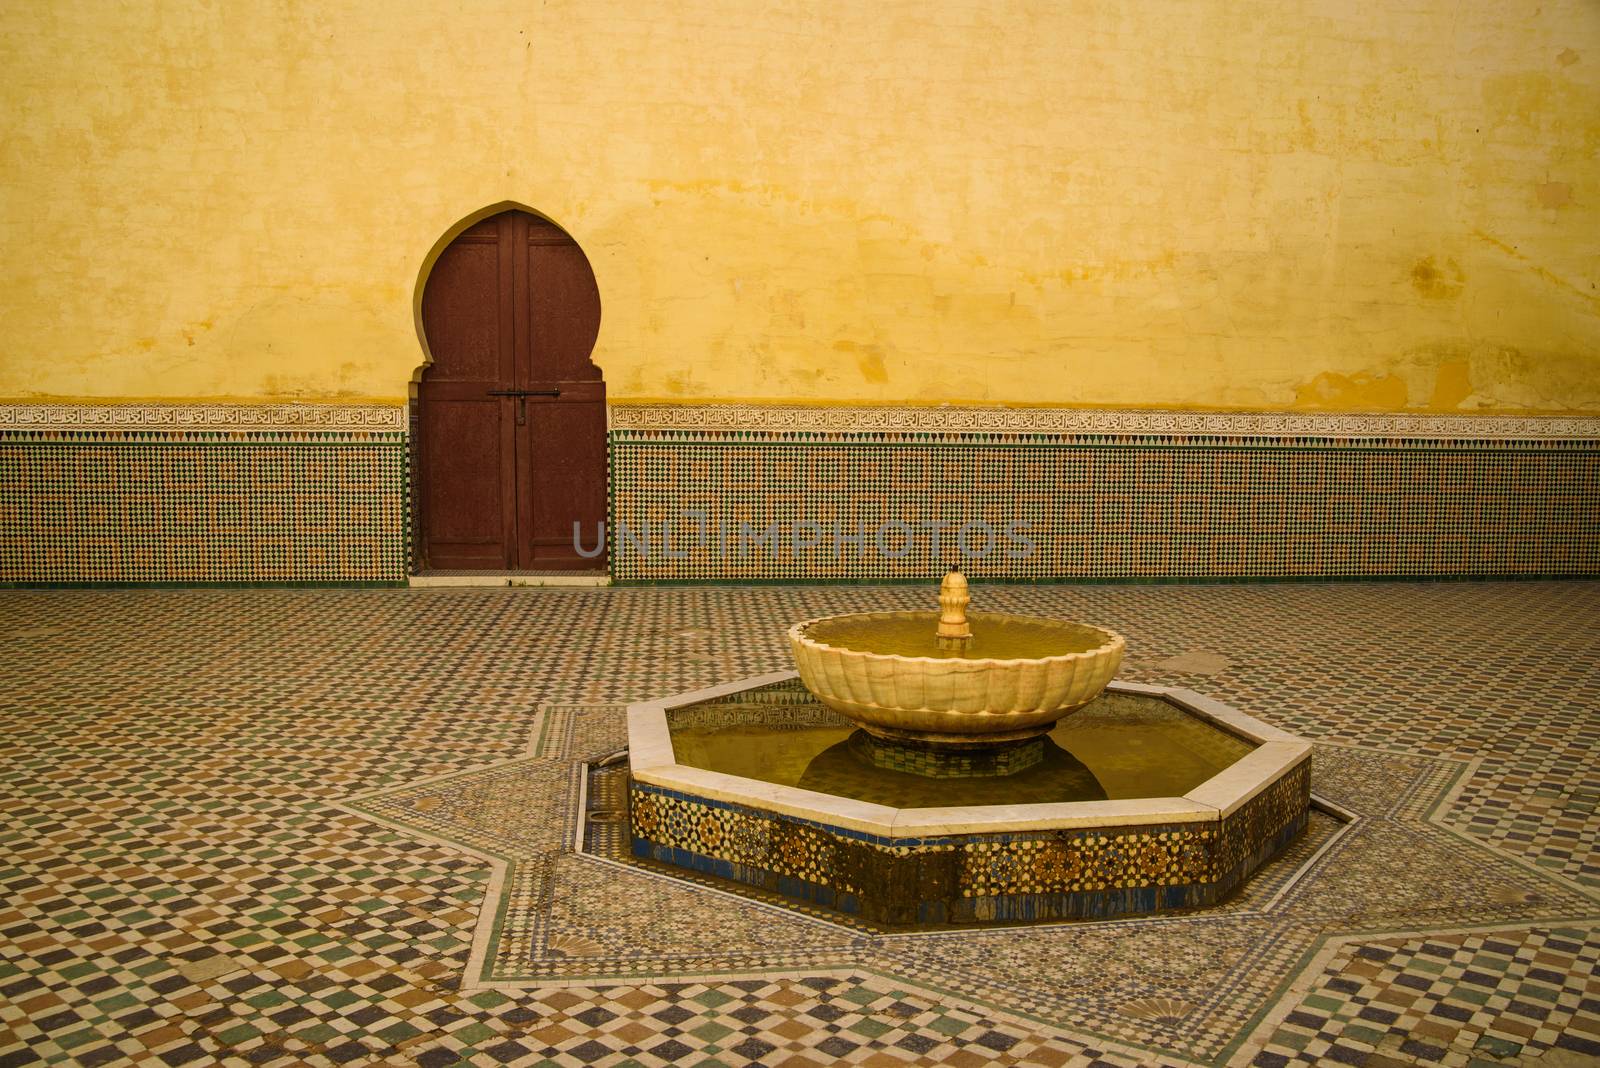 Mausoleum of Moulay Idris in Meknes, Morocco.